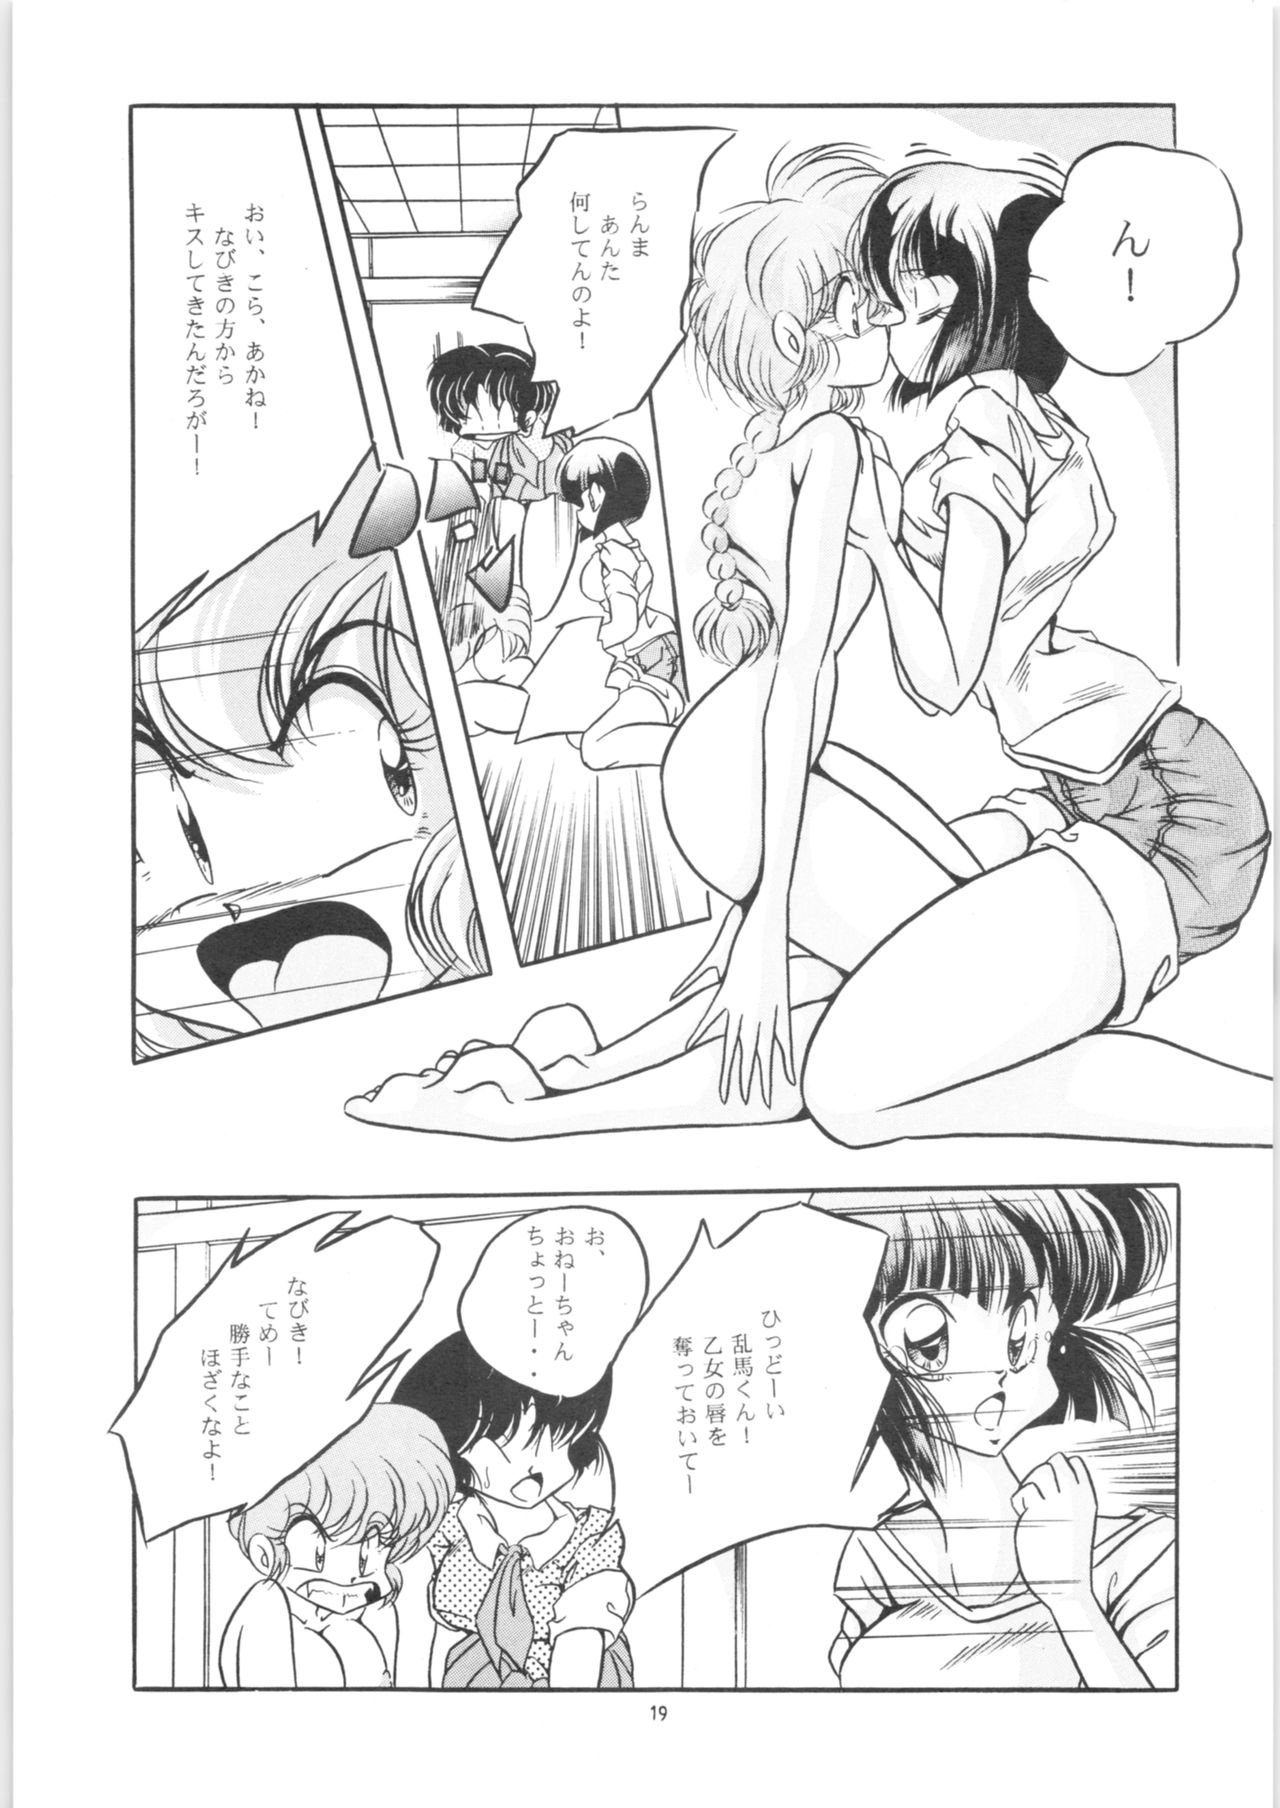 [C-COMPANY] C-COMPANY SPECIAL STAGE 14 (Ranma 1/2) page 20 full